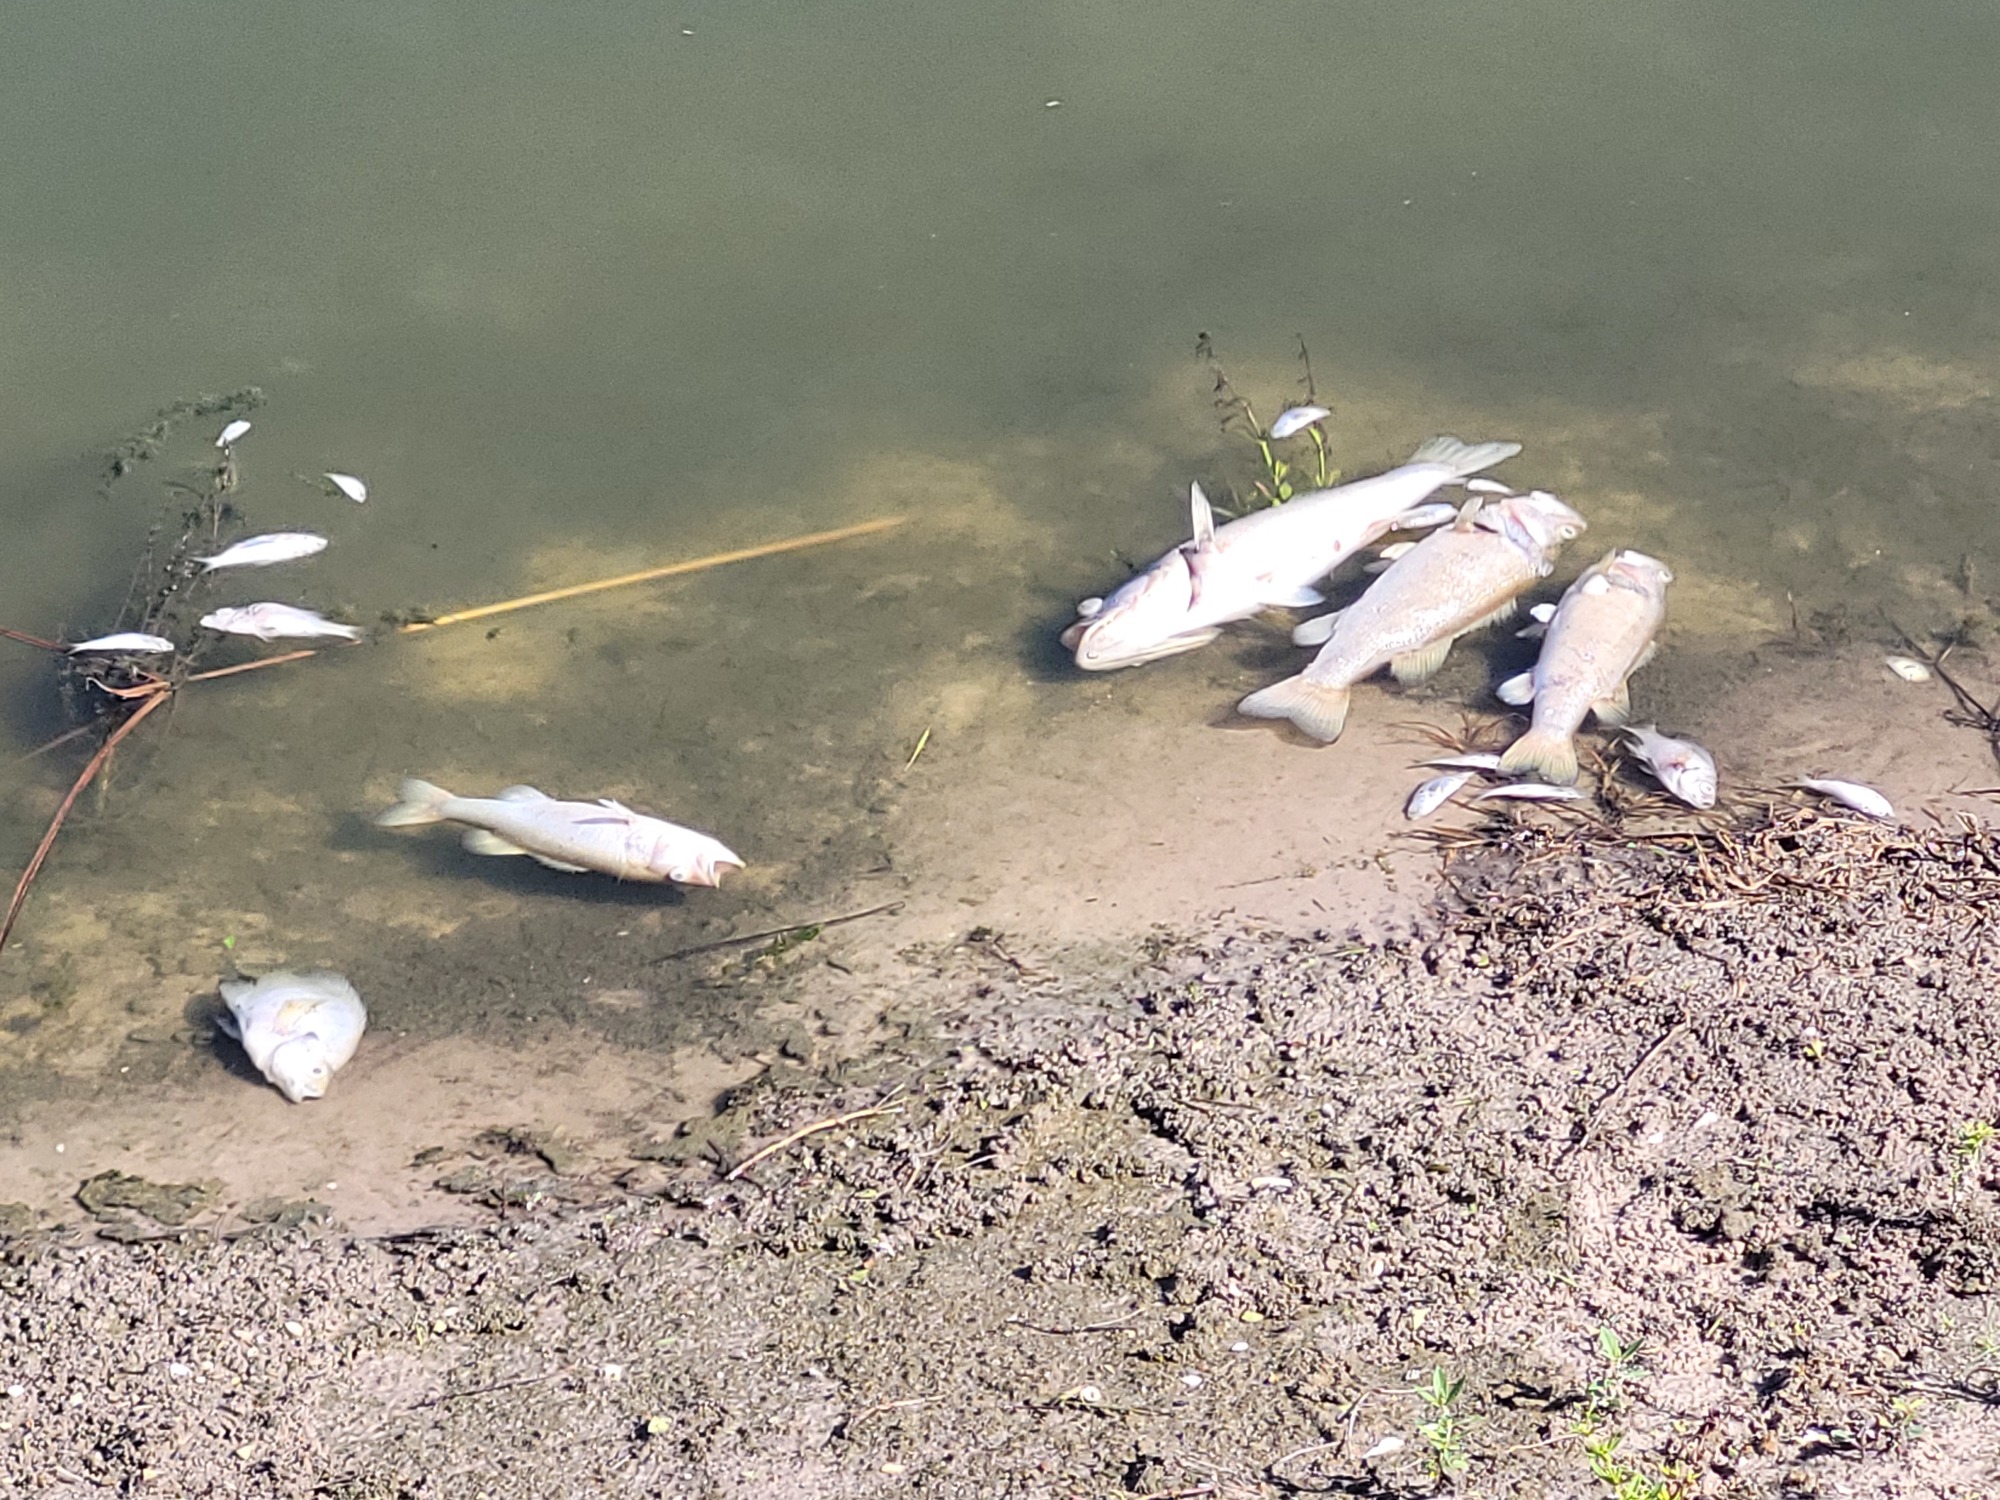 Lakewood Ranch's Scott Gruber said dead fish were lining the shores of a pond in Greenbrook Adventure Park. (Courtesy photo)